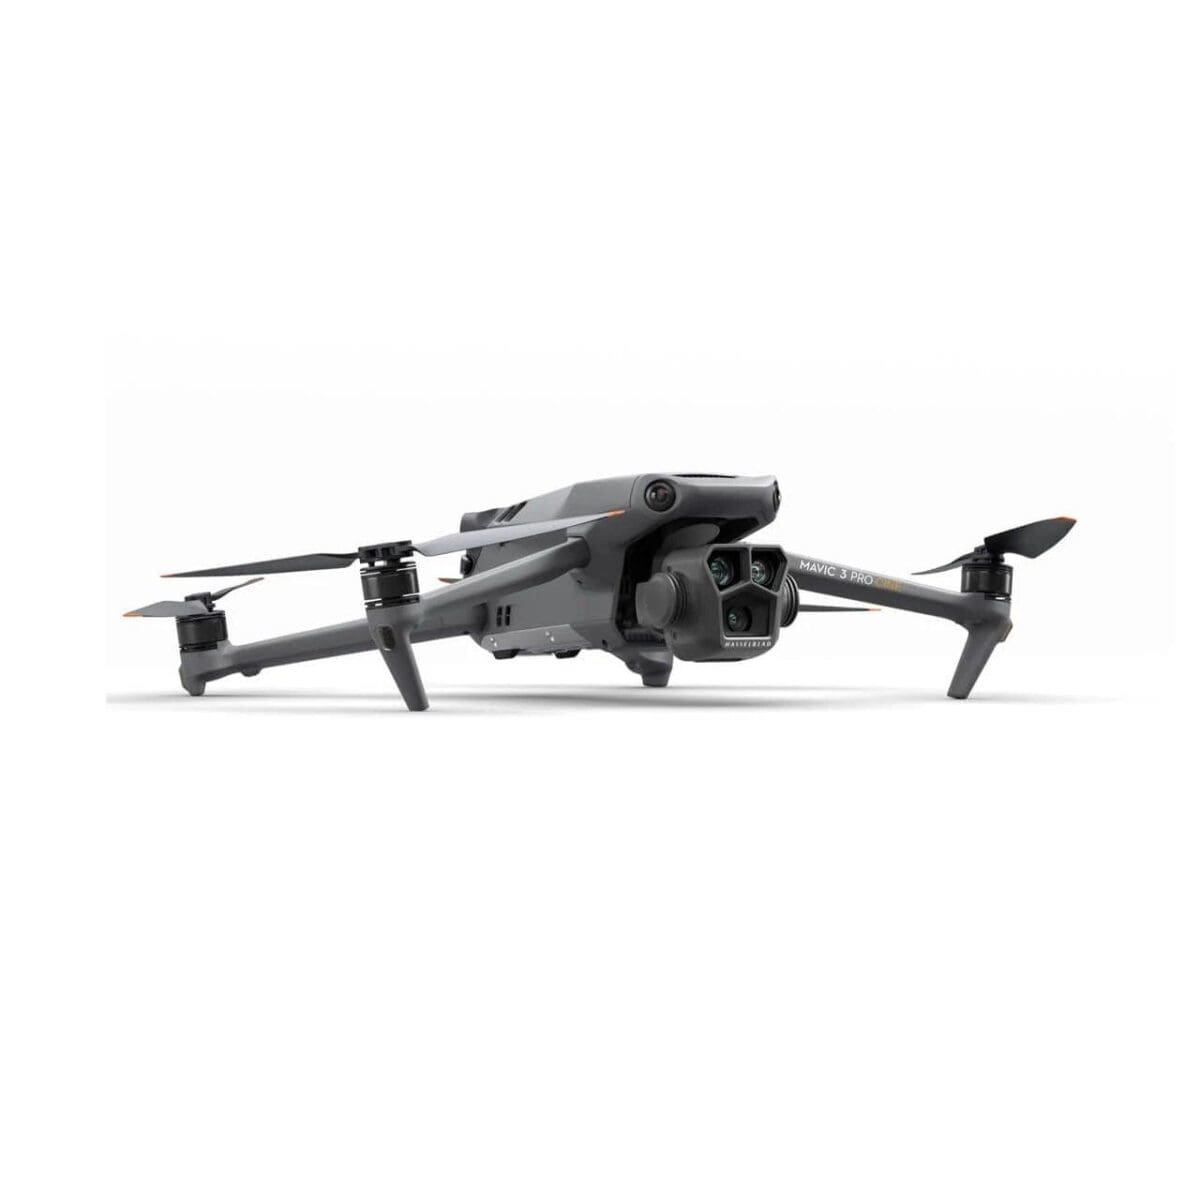 DJI Mavic 3 Pro Fly More Combo (DJI RC) – Quad Drone With 4/3 CMOS HasselBlad Camera and 5.1K Video